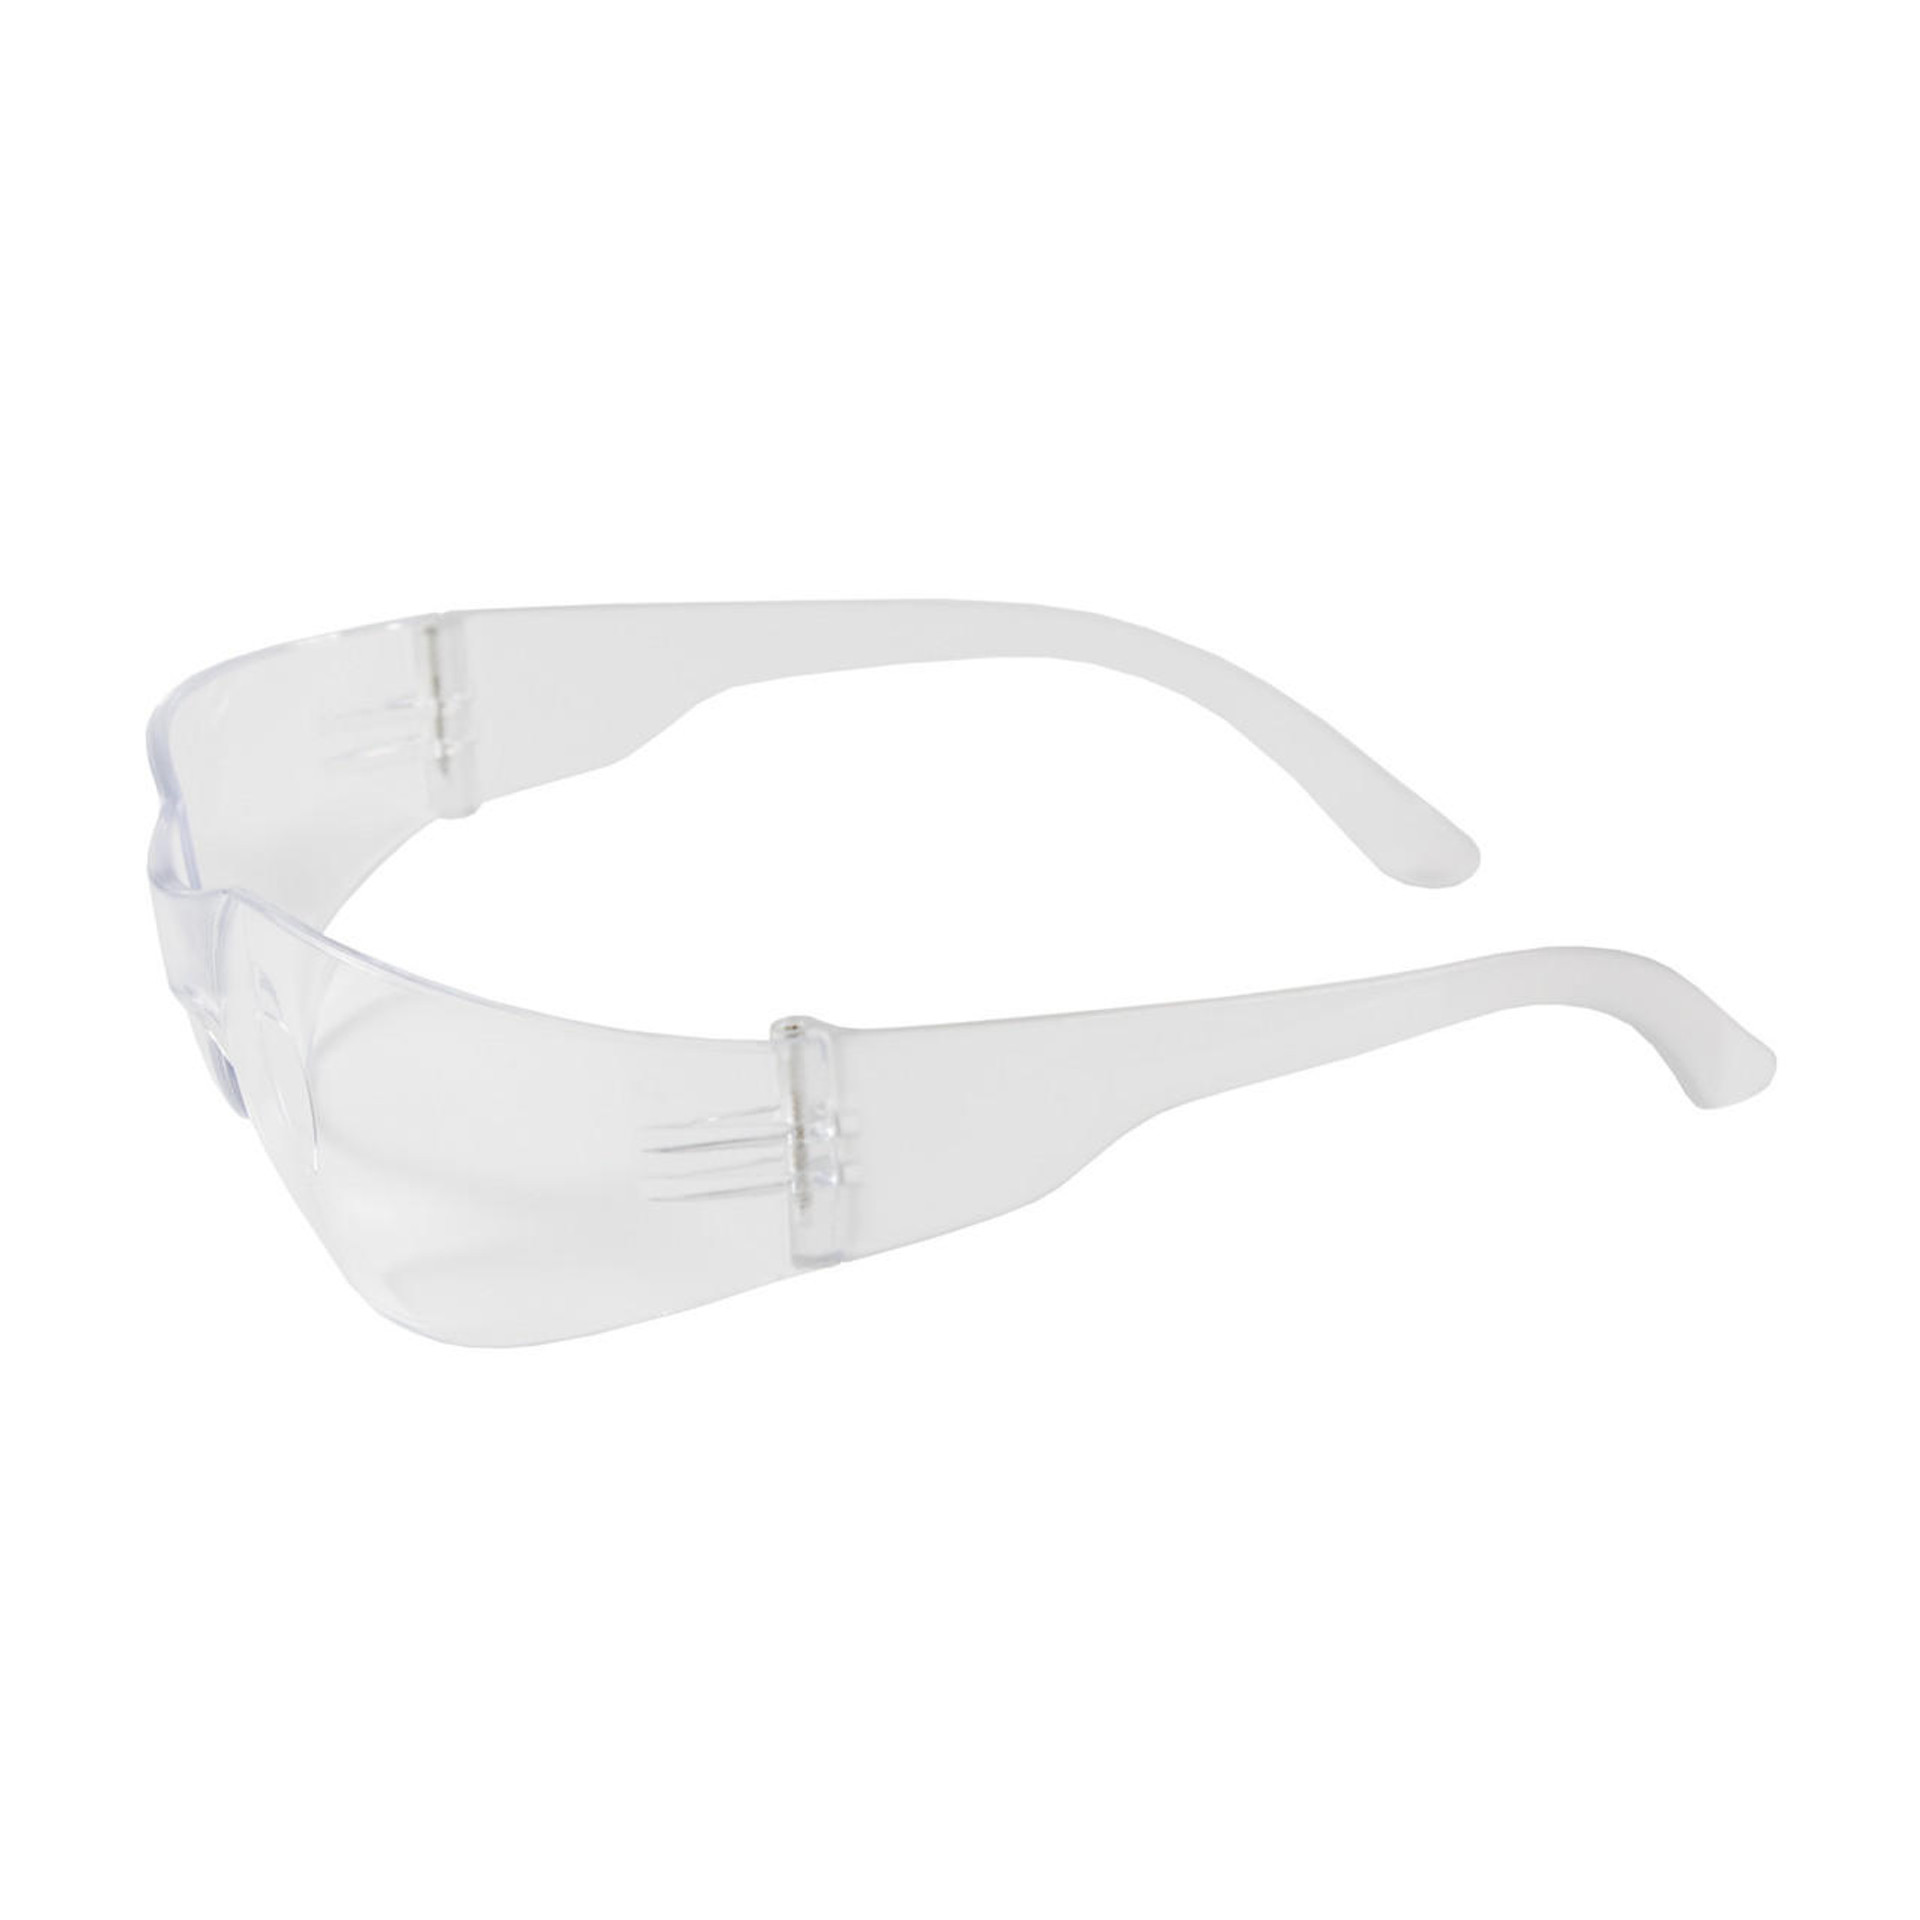 Pip 250 01 0900 Zenon Z12™ Rimless Safety Glasses Clear Temple Clear Lens Anti Scratch Coating